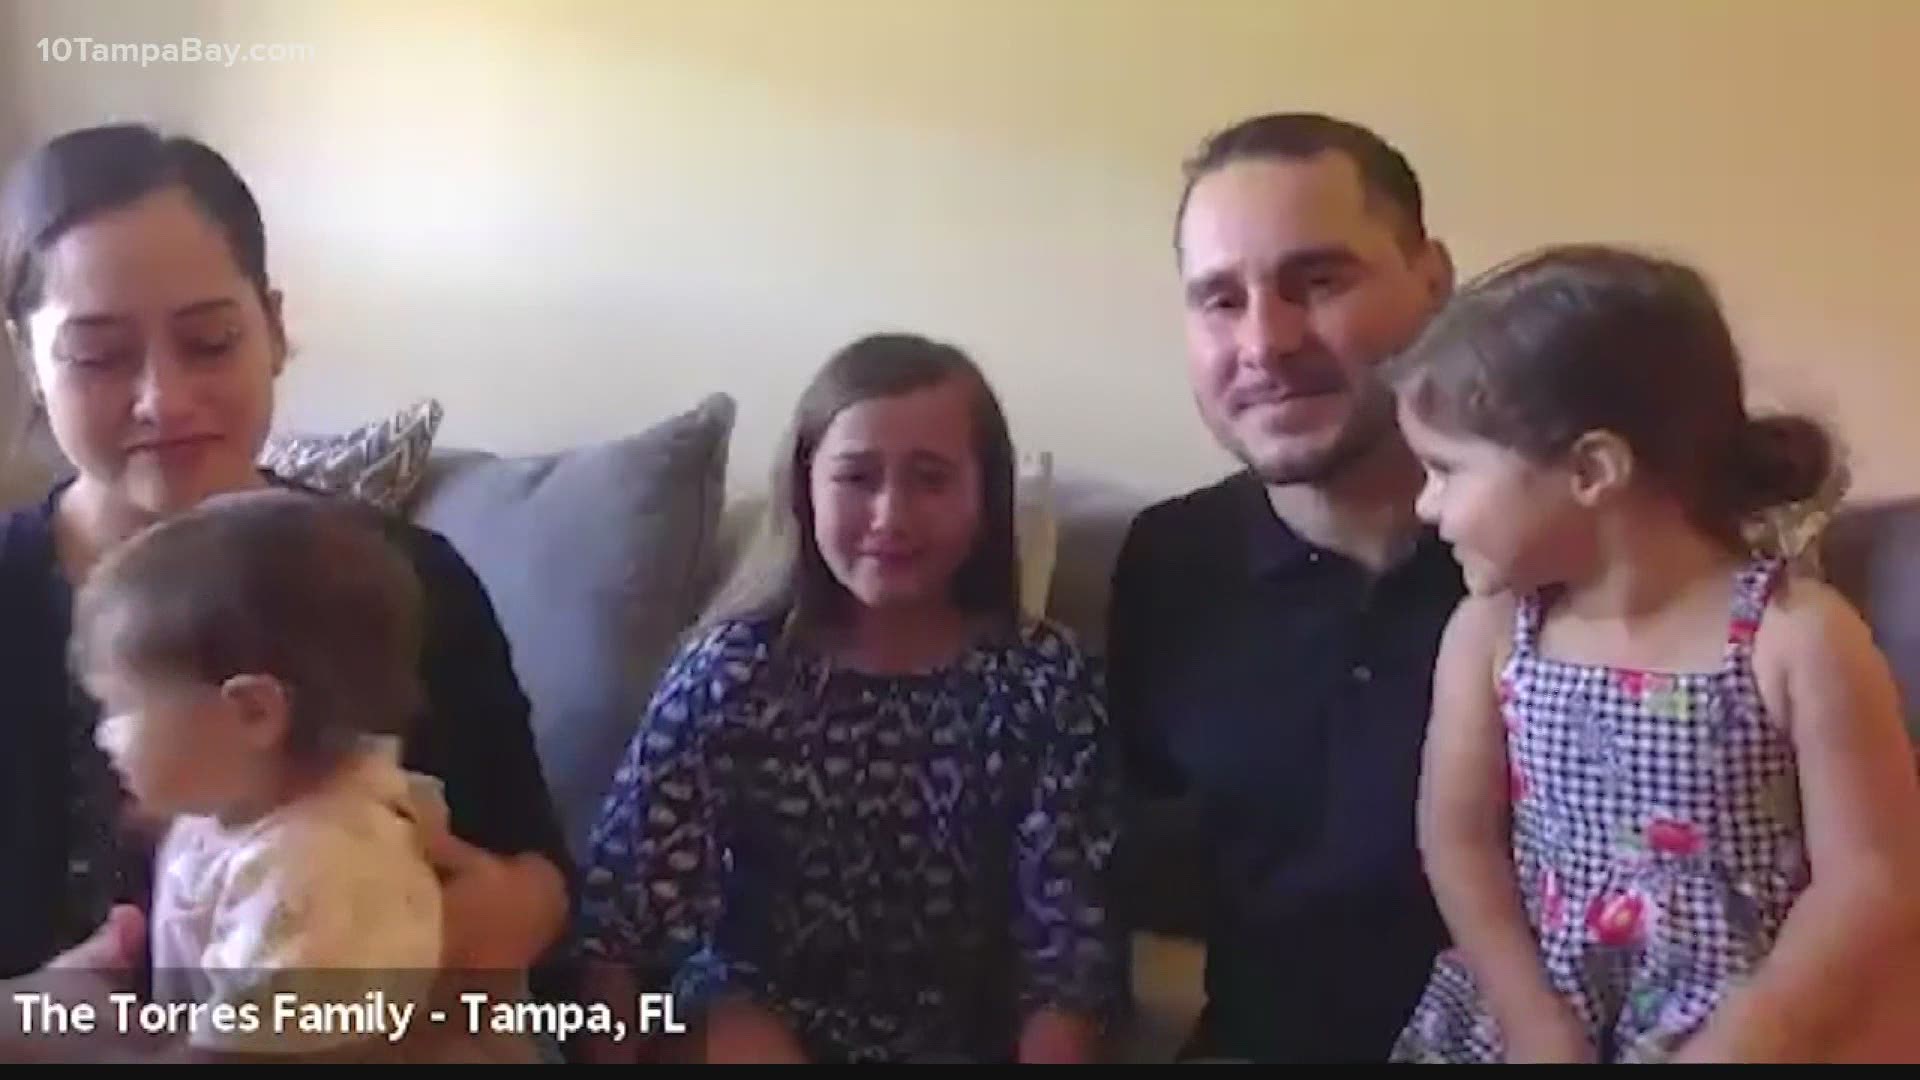 The veteran and his family are ringing in the new year with hope and joy.